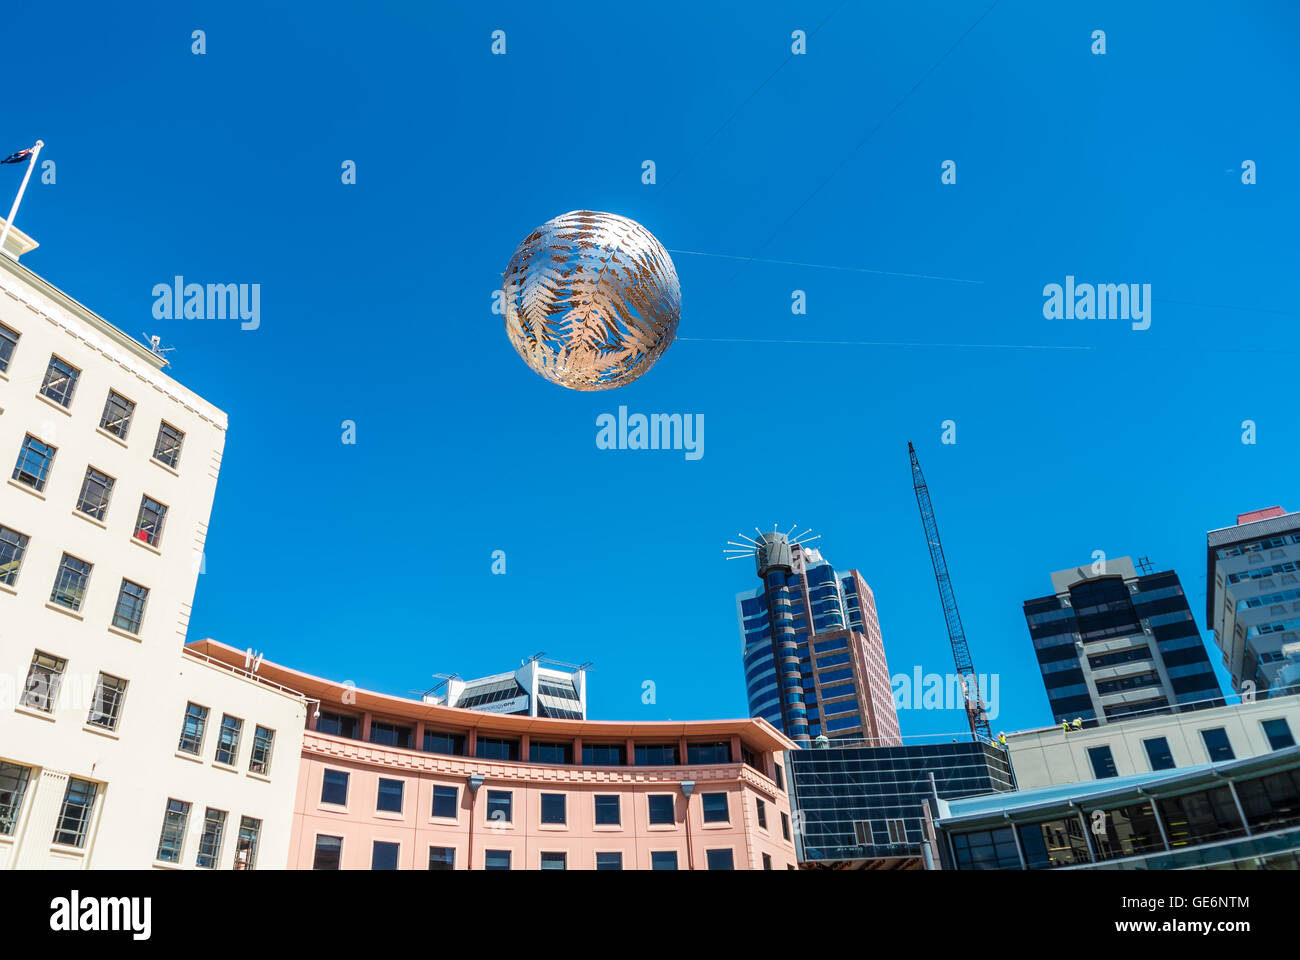 Silver fern-patterned filagree suspended globe, Civic Square, Wellington, New Zealand Stock Photo